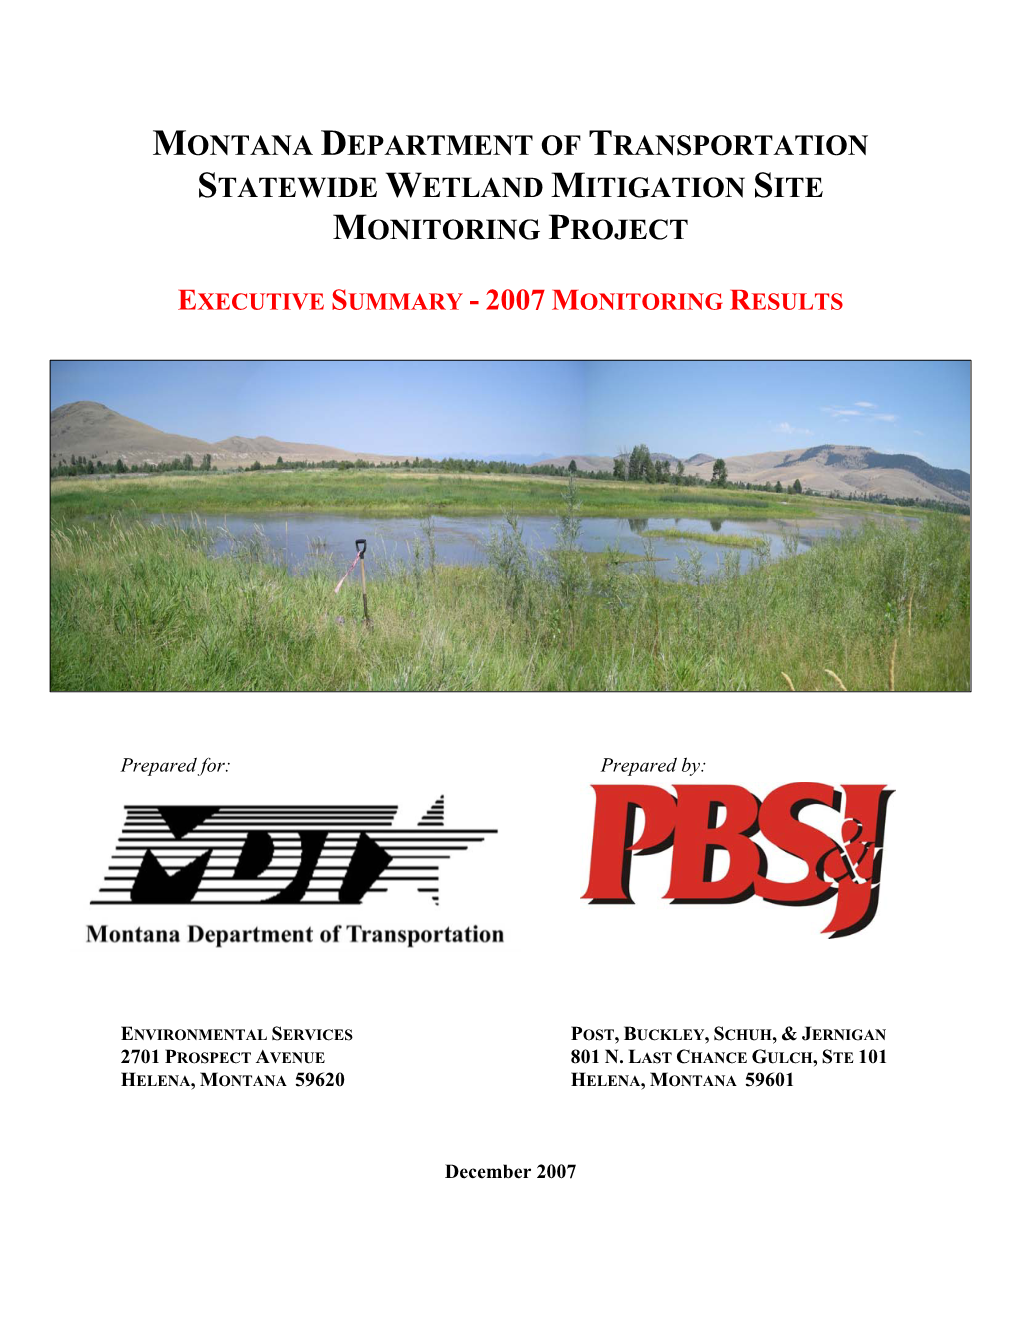 Montana Department of Transportation Statewide Wetland Mitigation Site Monitoring Project